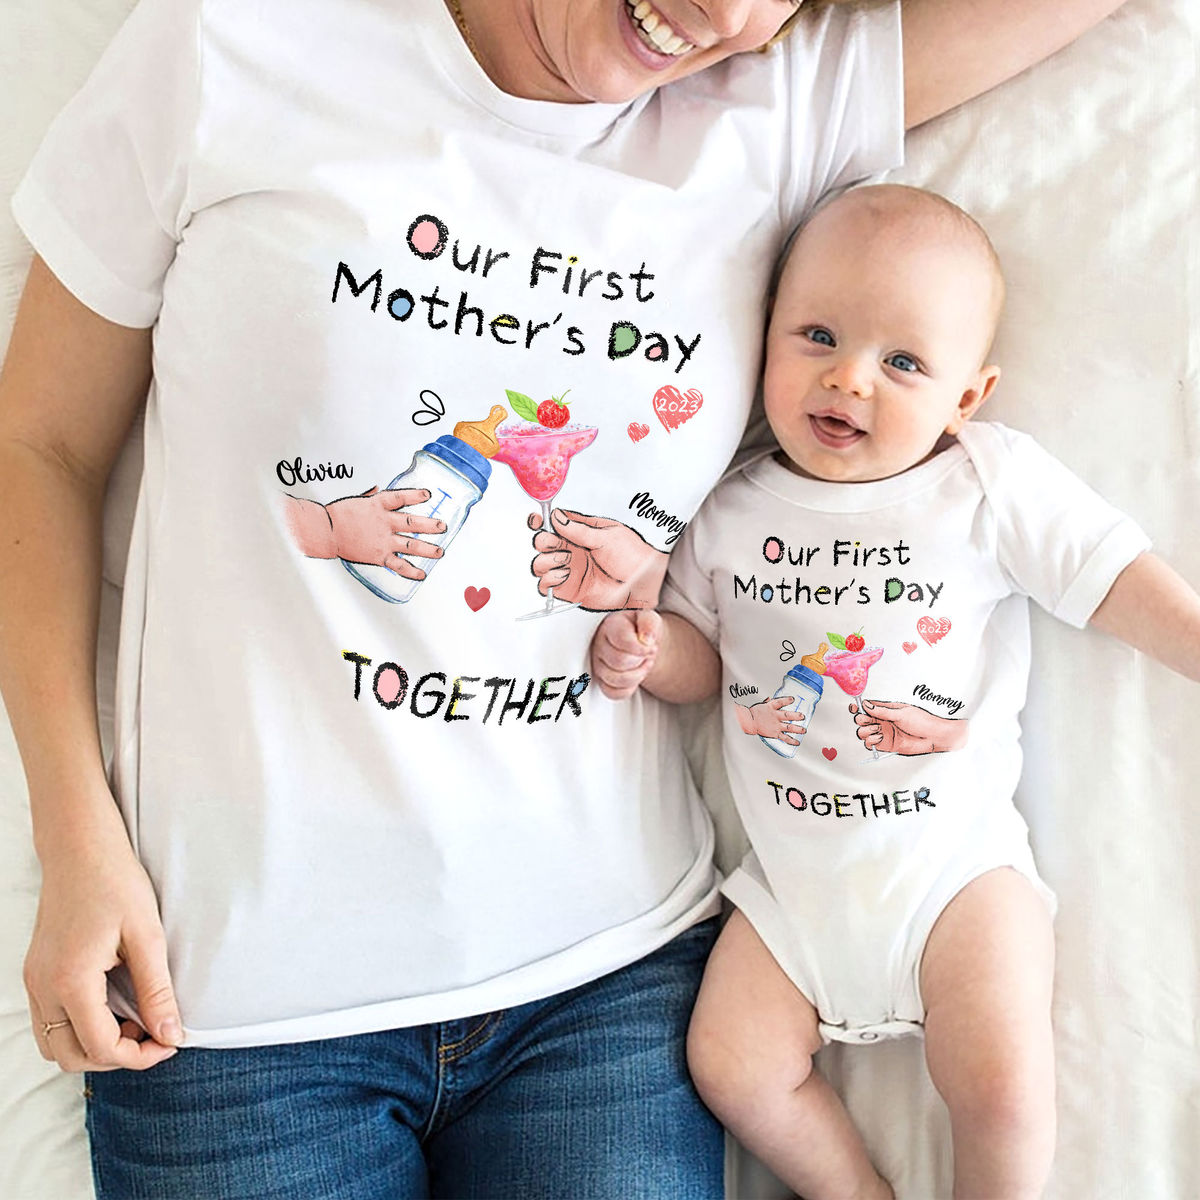 Our First Mothers's Day Matching Outfit (Onesie and TShirt Set) - Wine n Milk